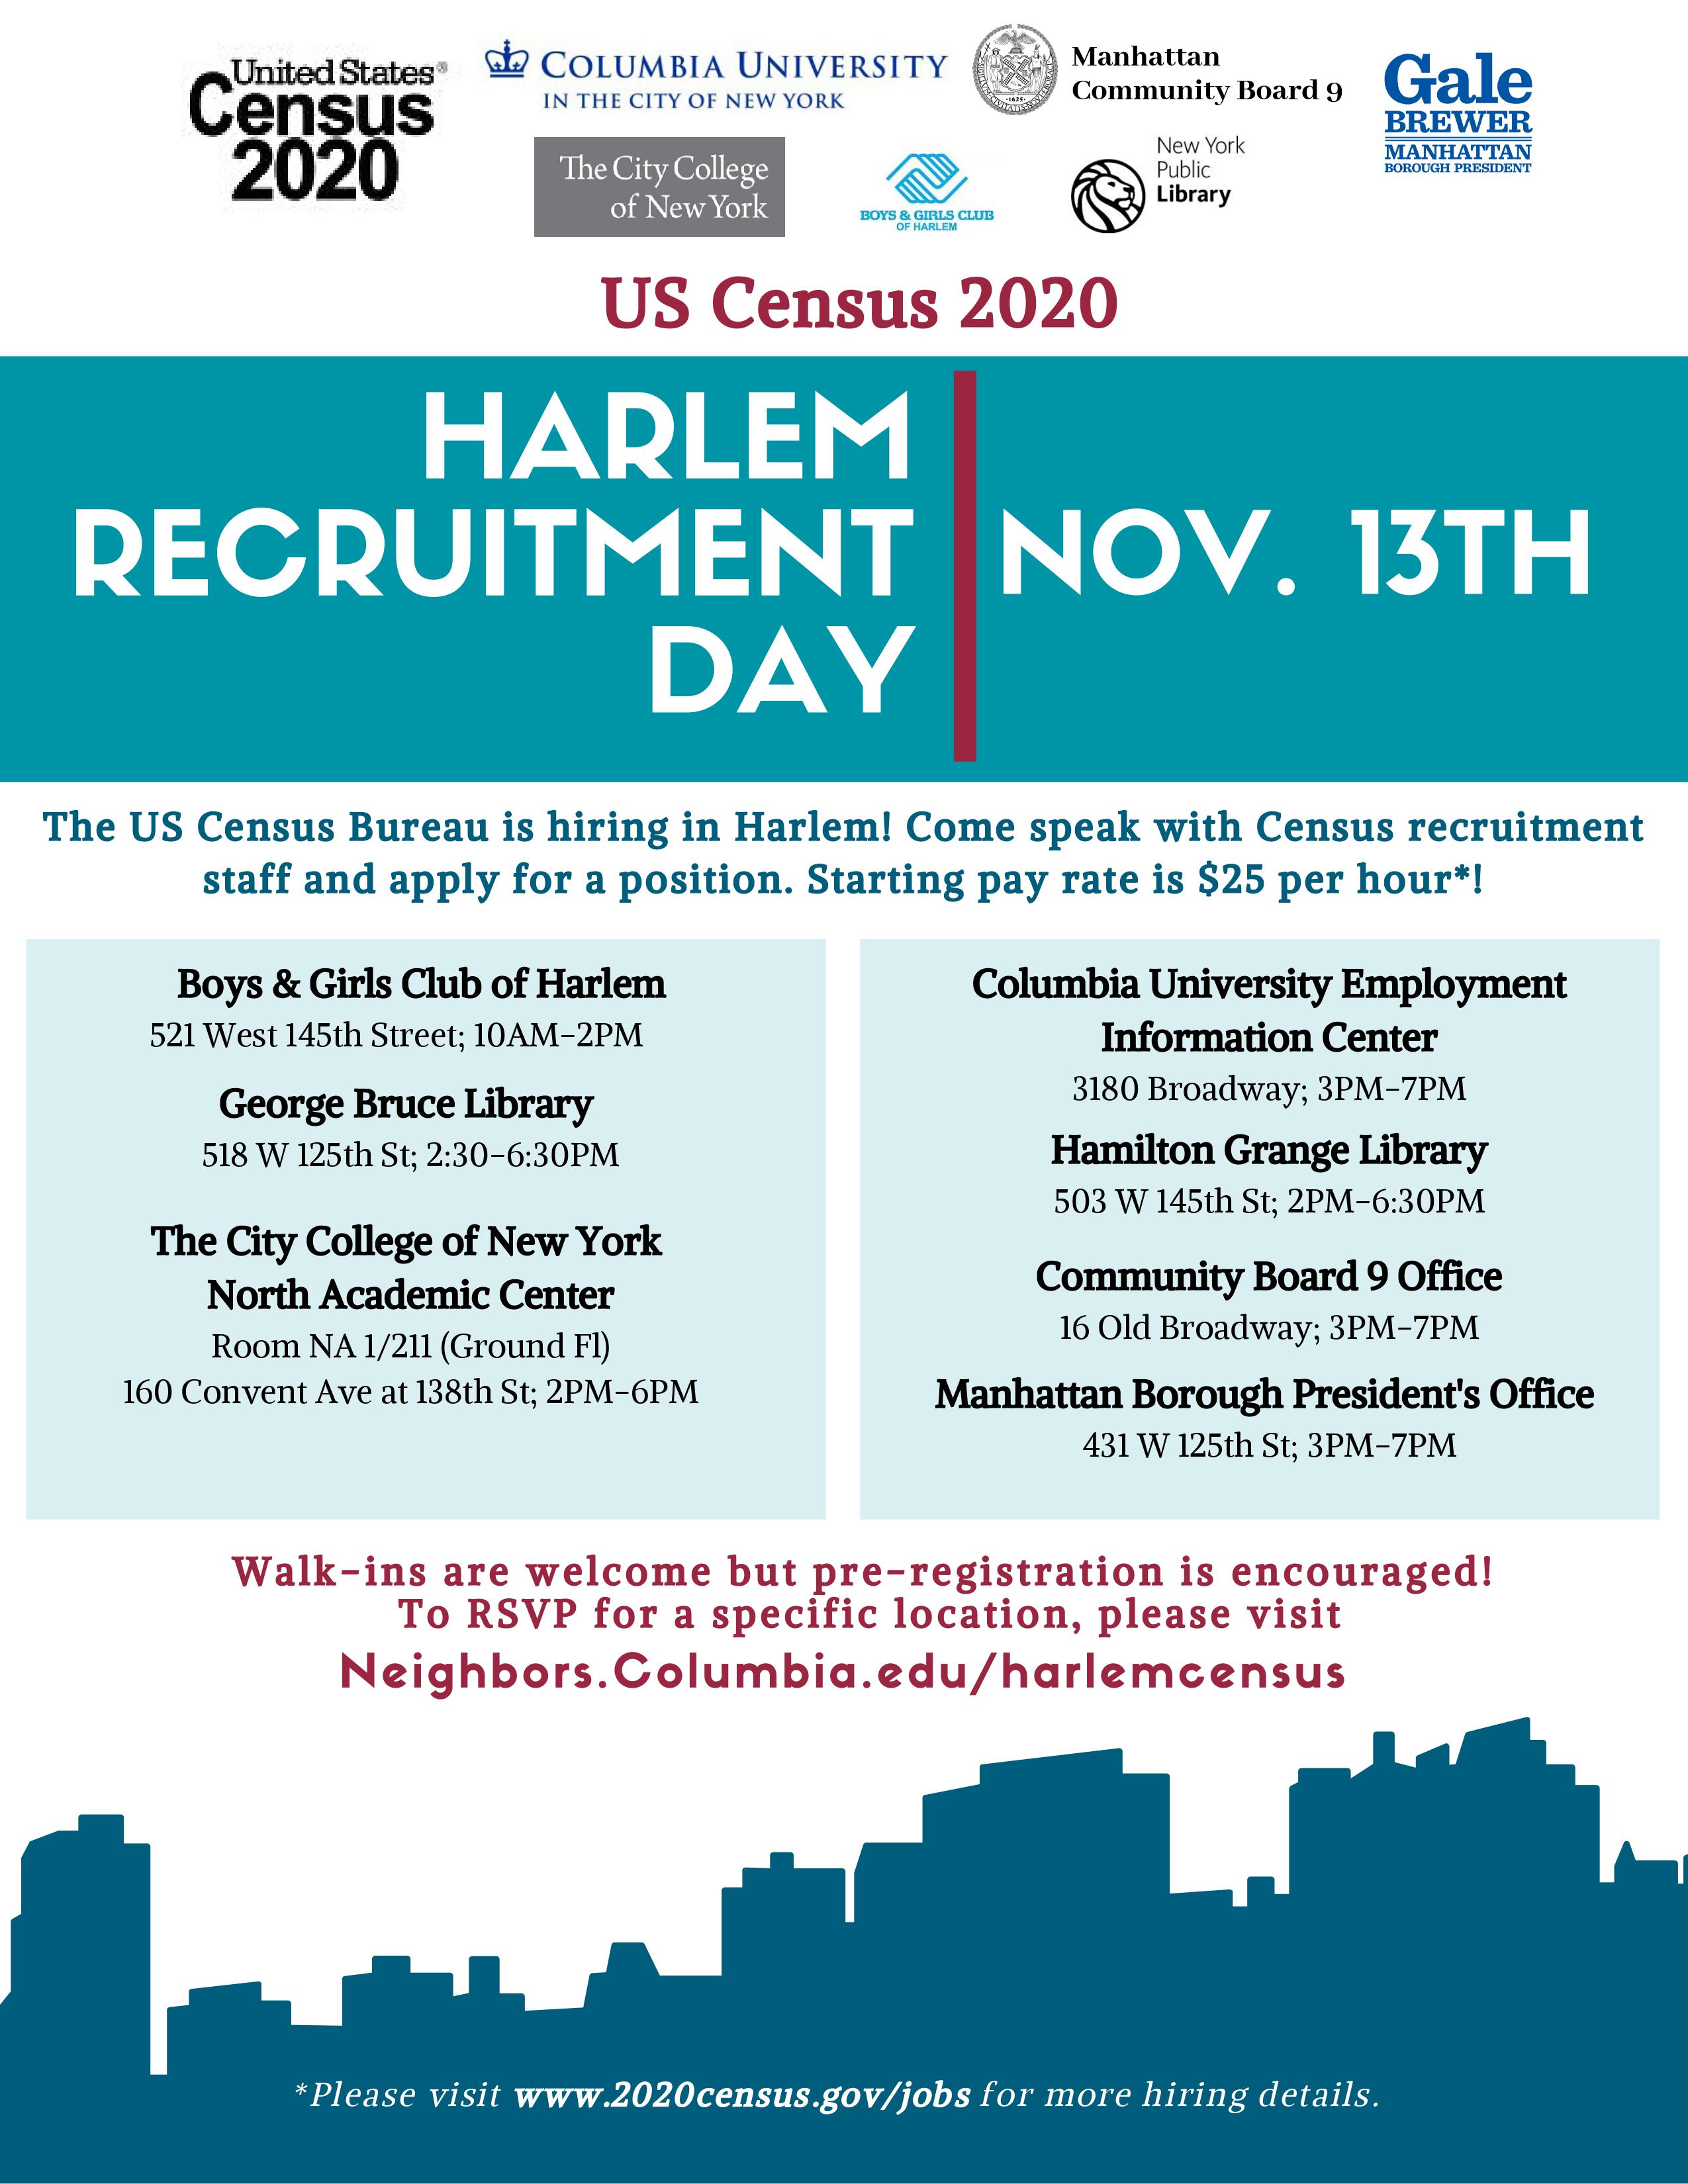 The US Census Bureau is hiring in Upper Manhattan! Come speak with Census recruitment officers and apply for Census taker and administrative positions. Starting pay rate is $25 per hour! RSVP https://neighbors.columbia.edu/events/census-2020-harlem-recruitment-day